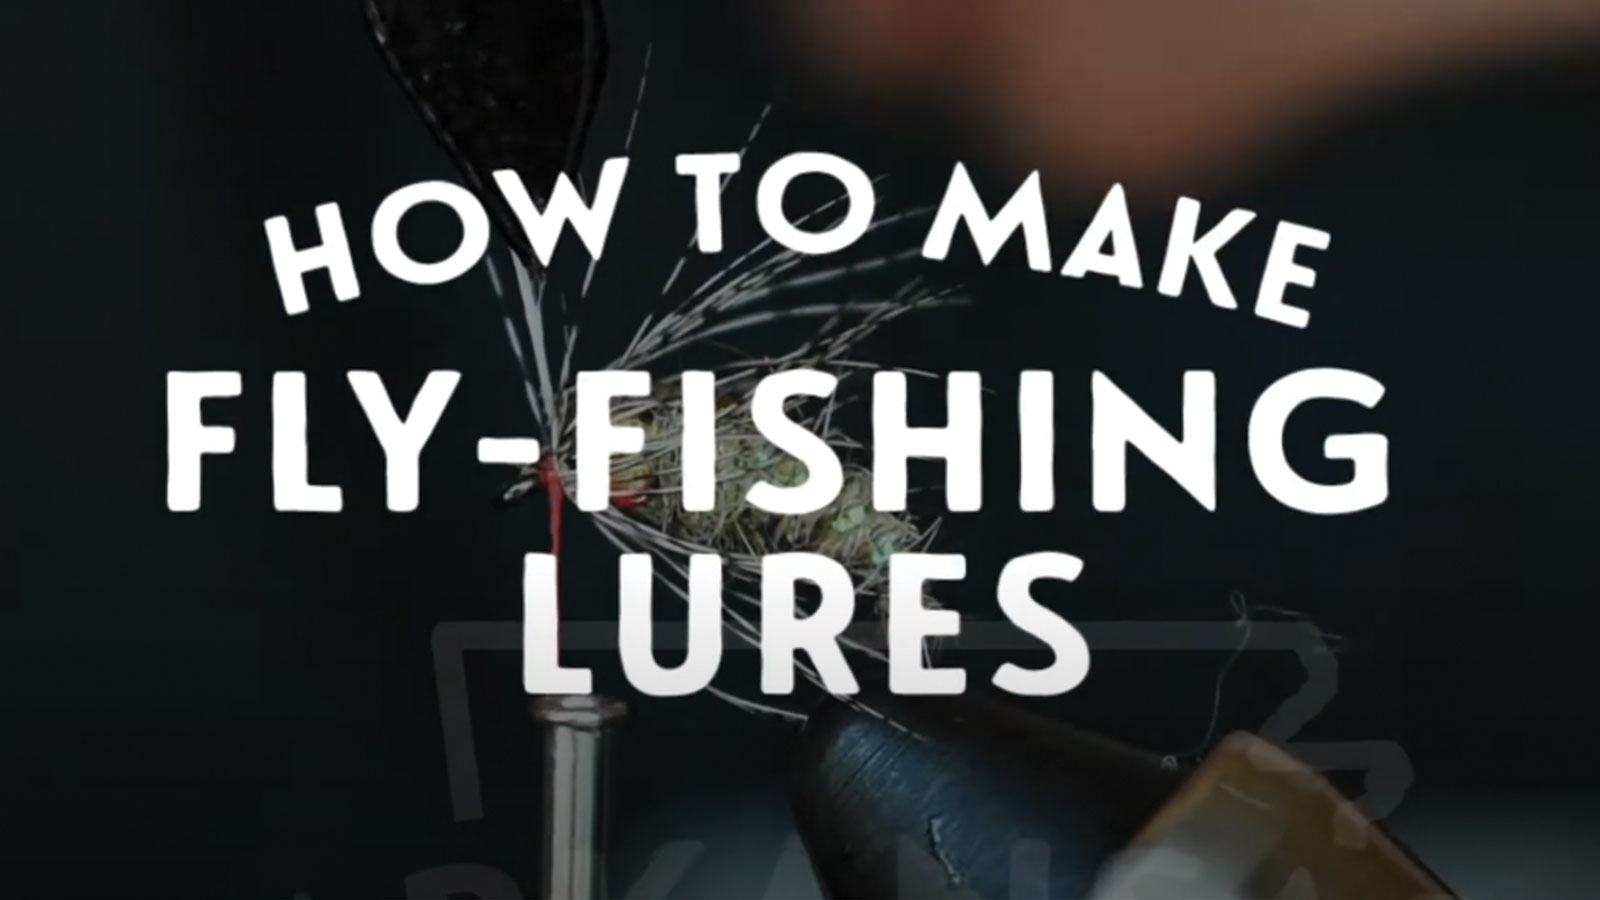 How to make fly-fishing lures